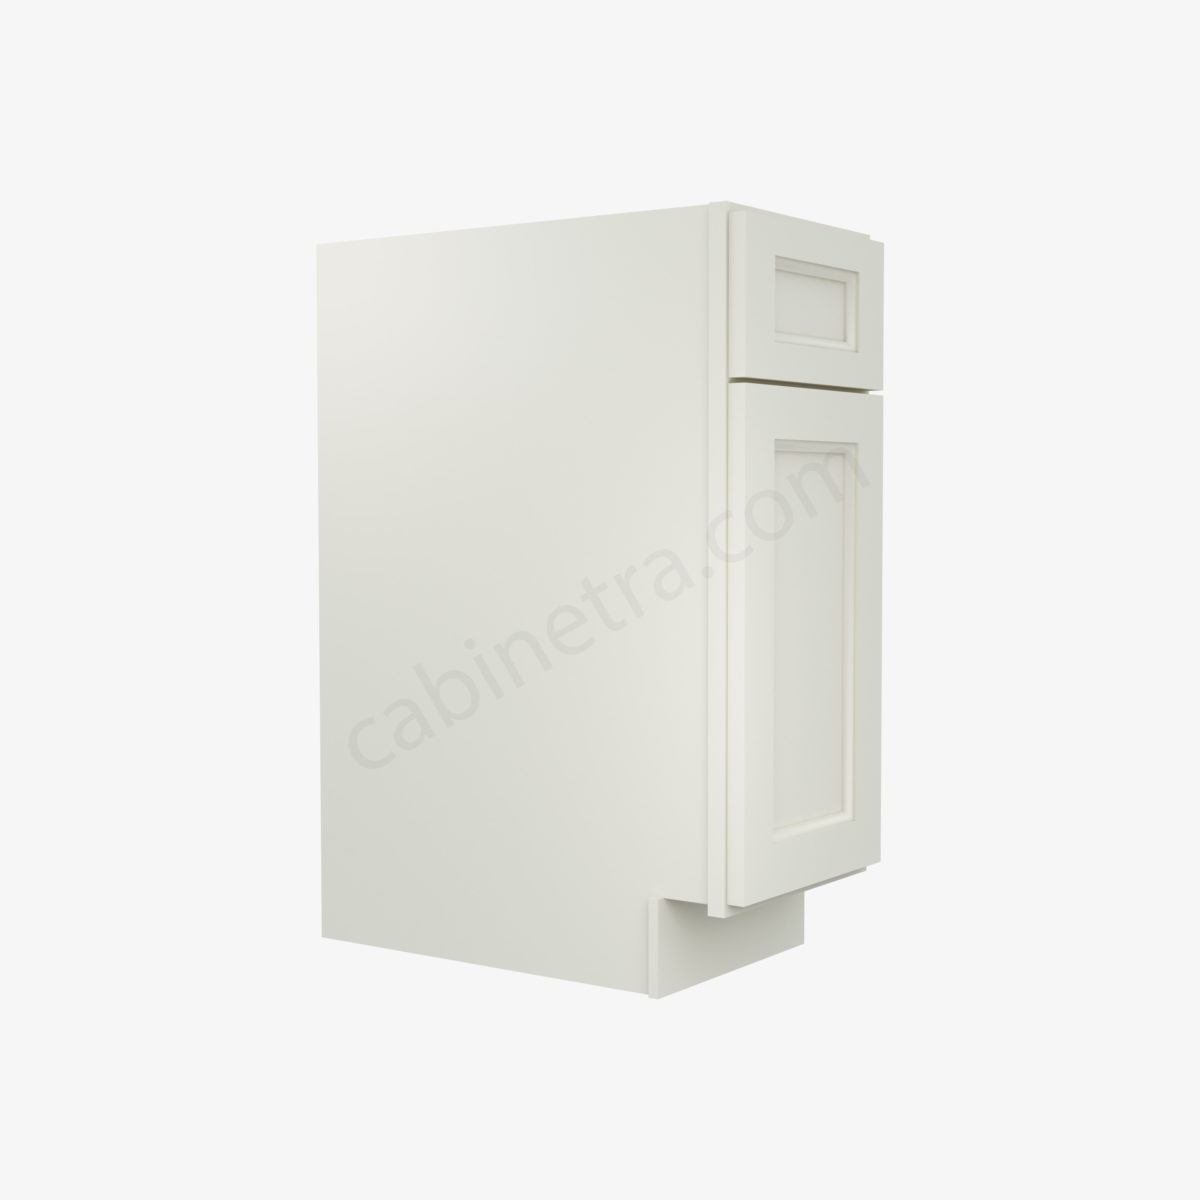 TQ B12 4 Forevermark Townplace Crema Cabinetra scaled